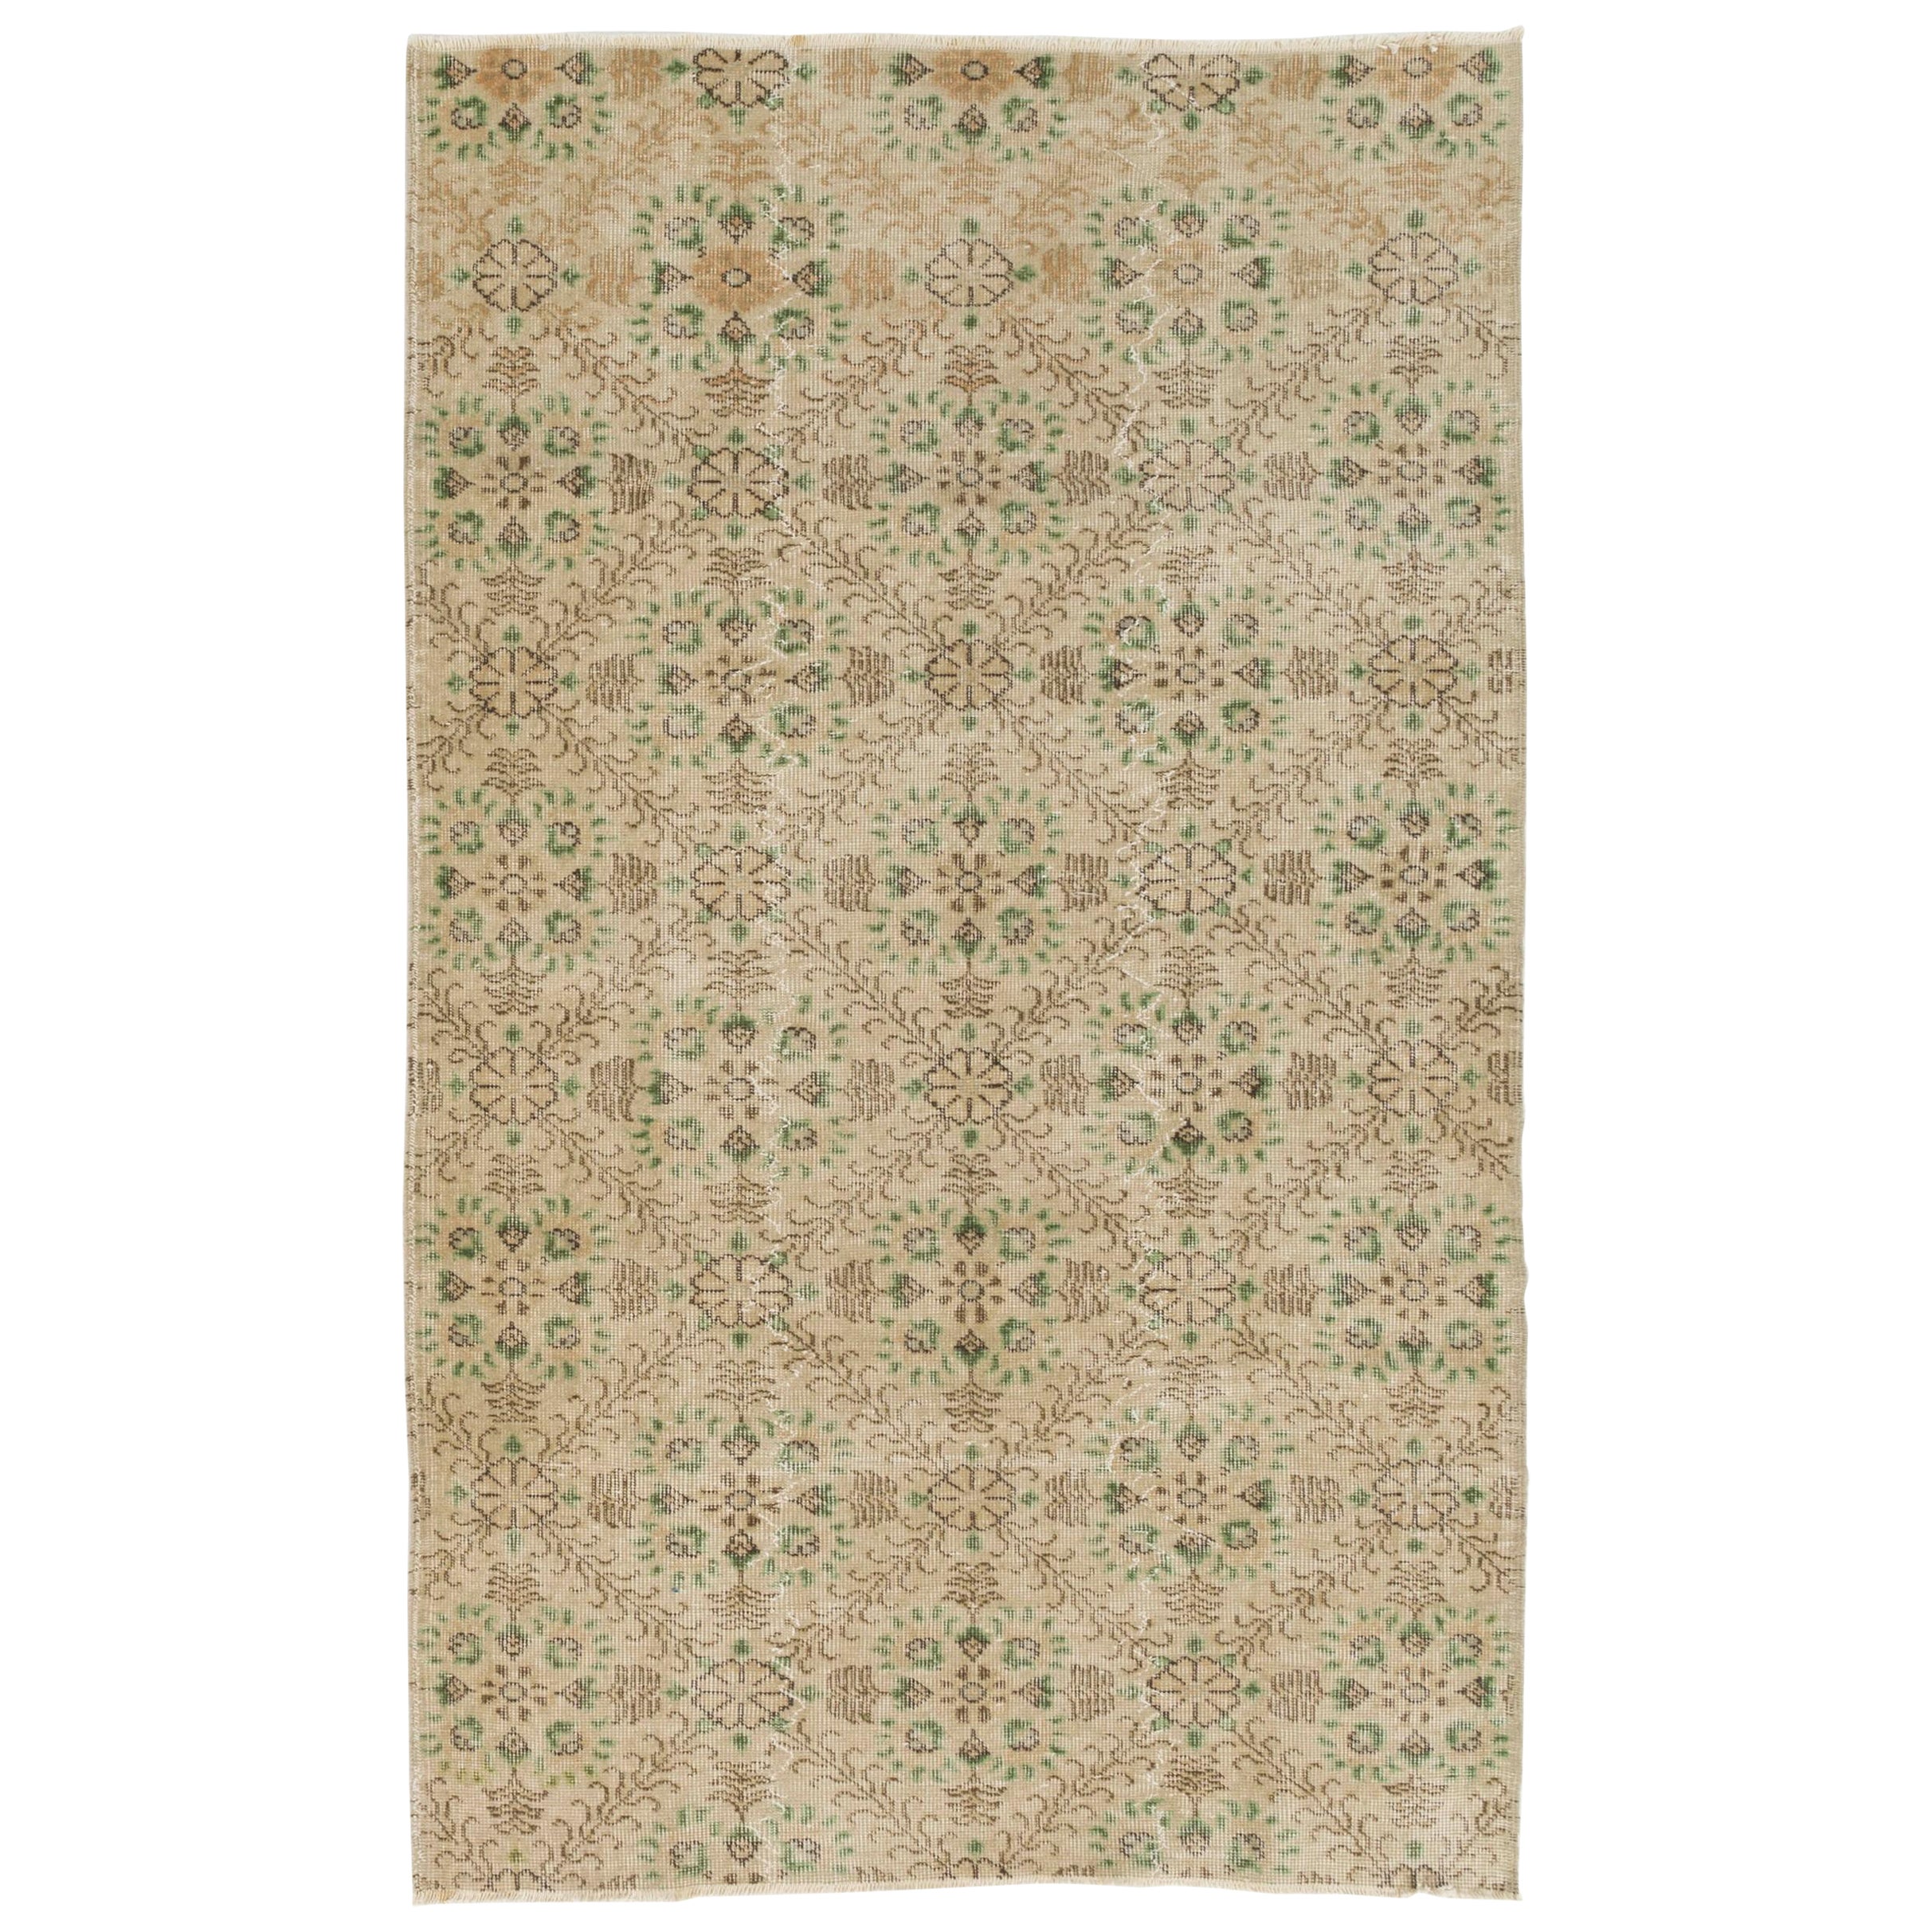 4x6.6 ft Vintage Hand-knotted Turkish Floral Wool Rug in Soft Pastel Tones For Sale